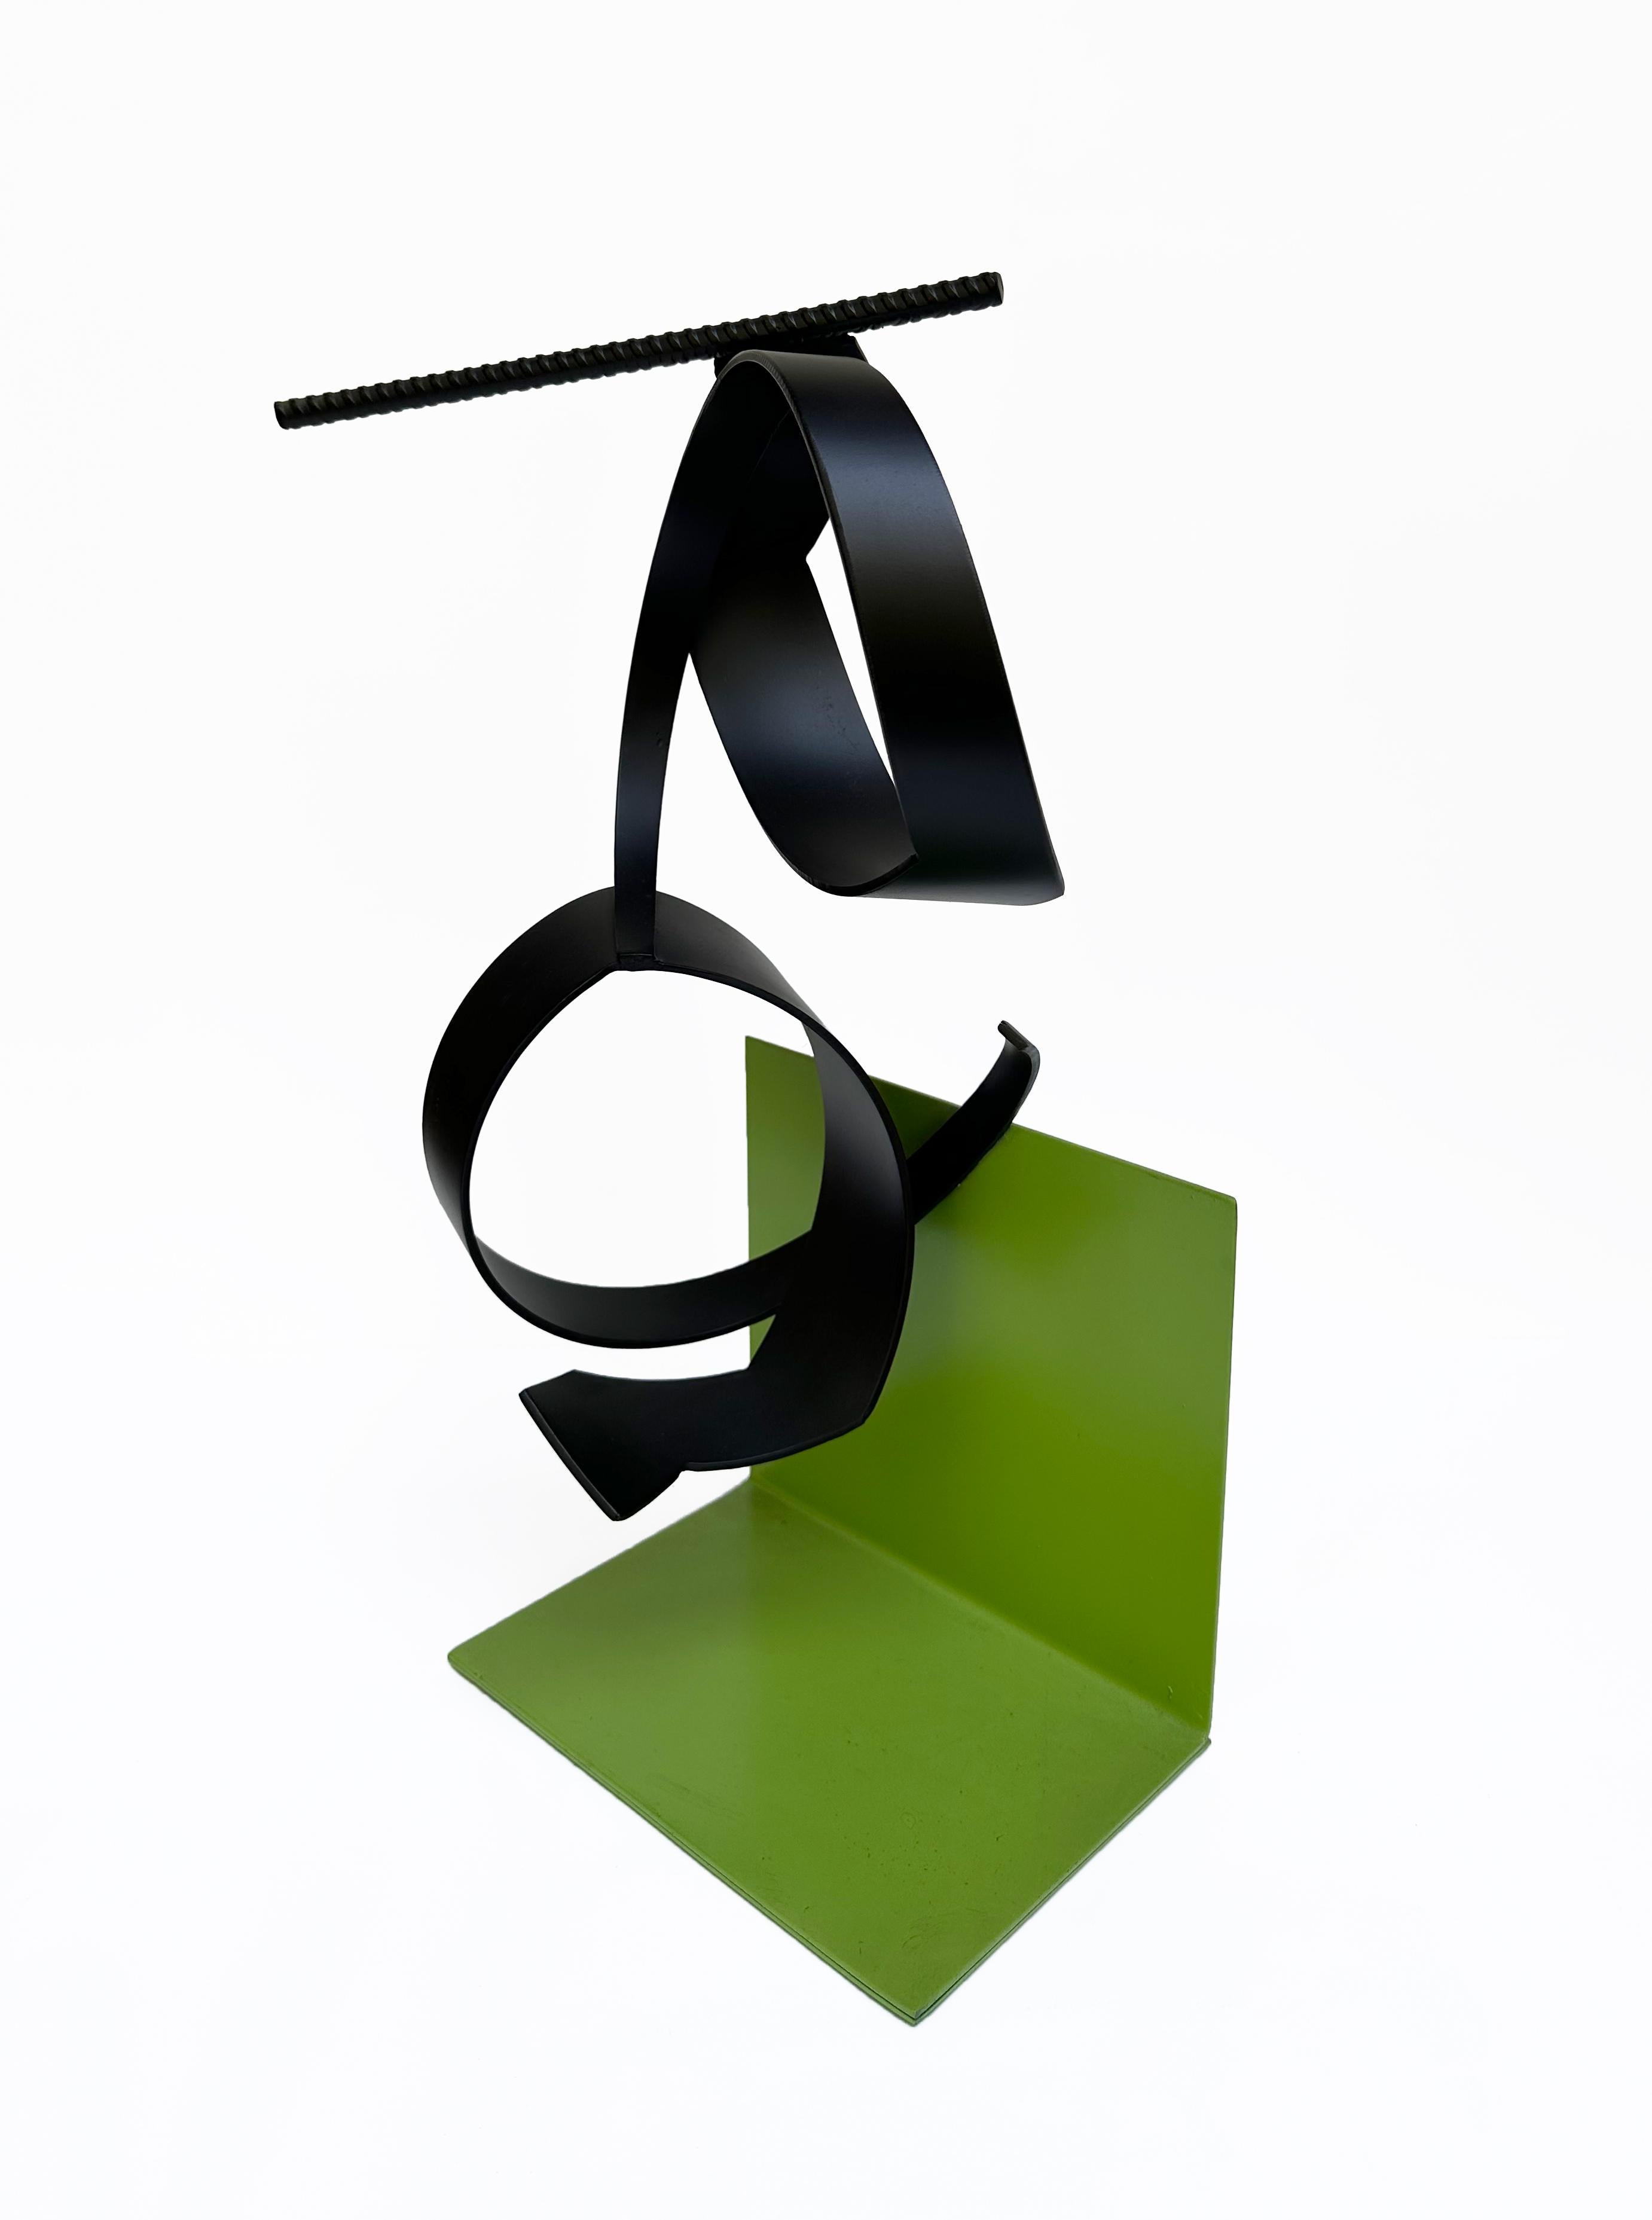 It's me 13 - On the green wall - Green Abstract Sculpture by Alex Corno